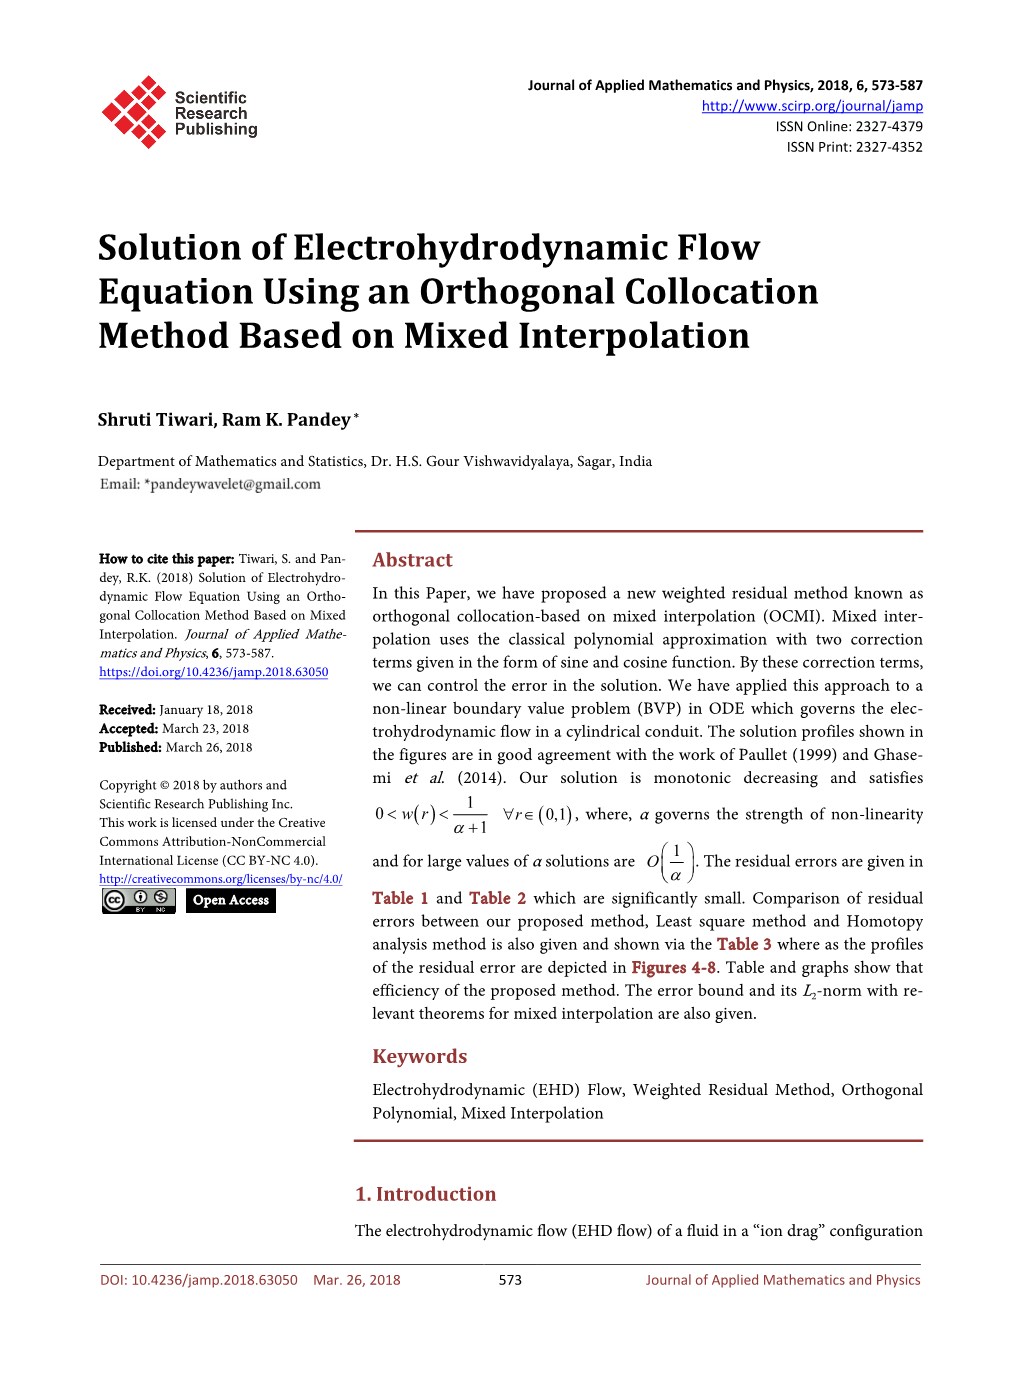 Solution of Electrohydrodynamic Flow Equation Using an Orthogonal Collocation Method Based on Mixed Interpolation